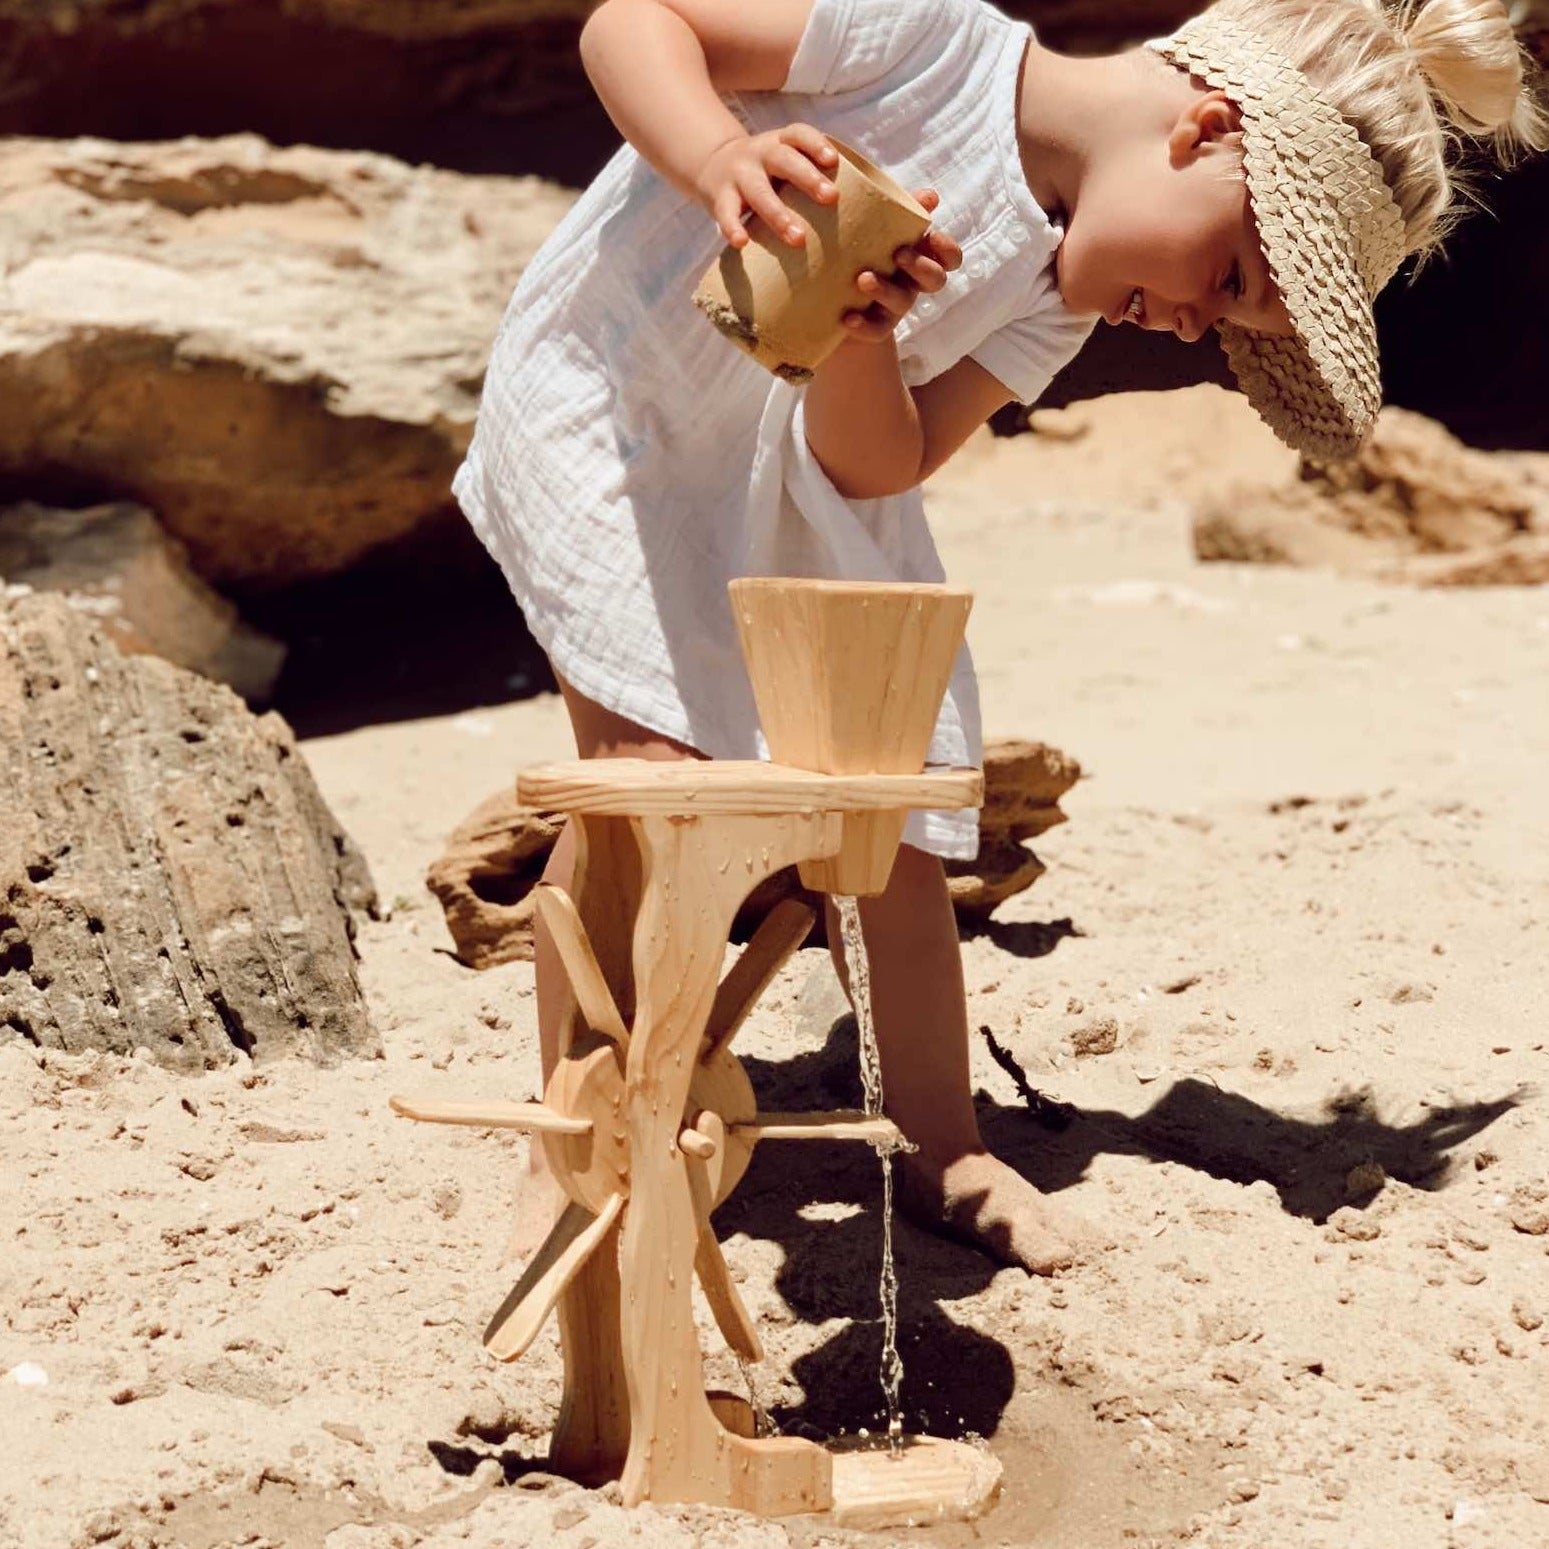 Explore Nook Wooden Water & Sensory Play Wheel - Little Reef and Friends